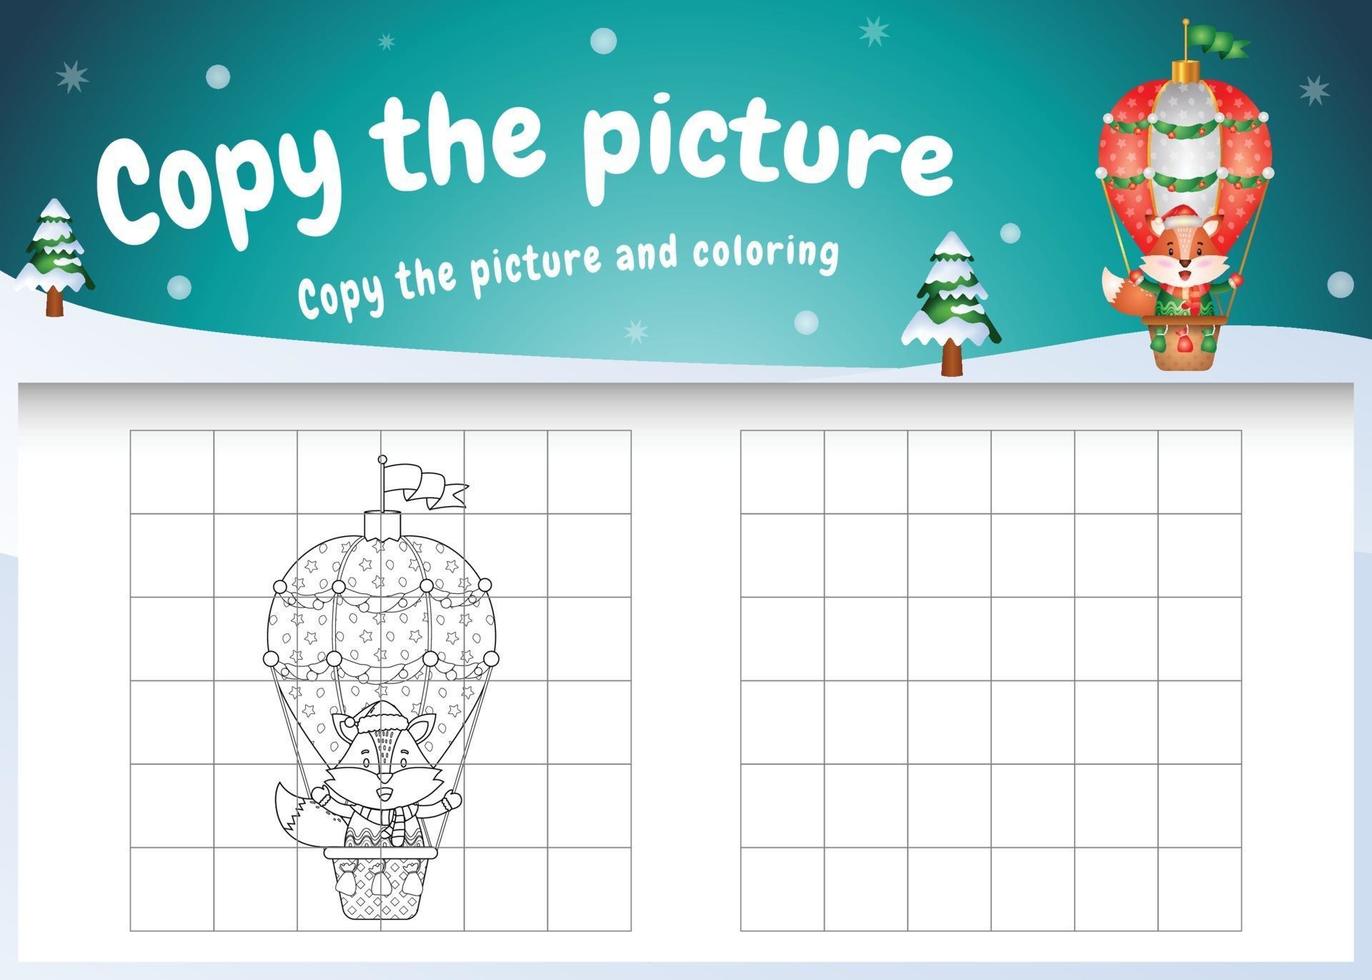 copy the picture kids game and coloring page with a cute fox on hot air balloon vector